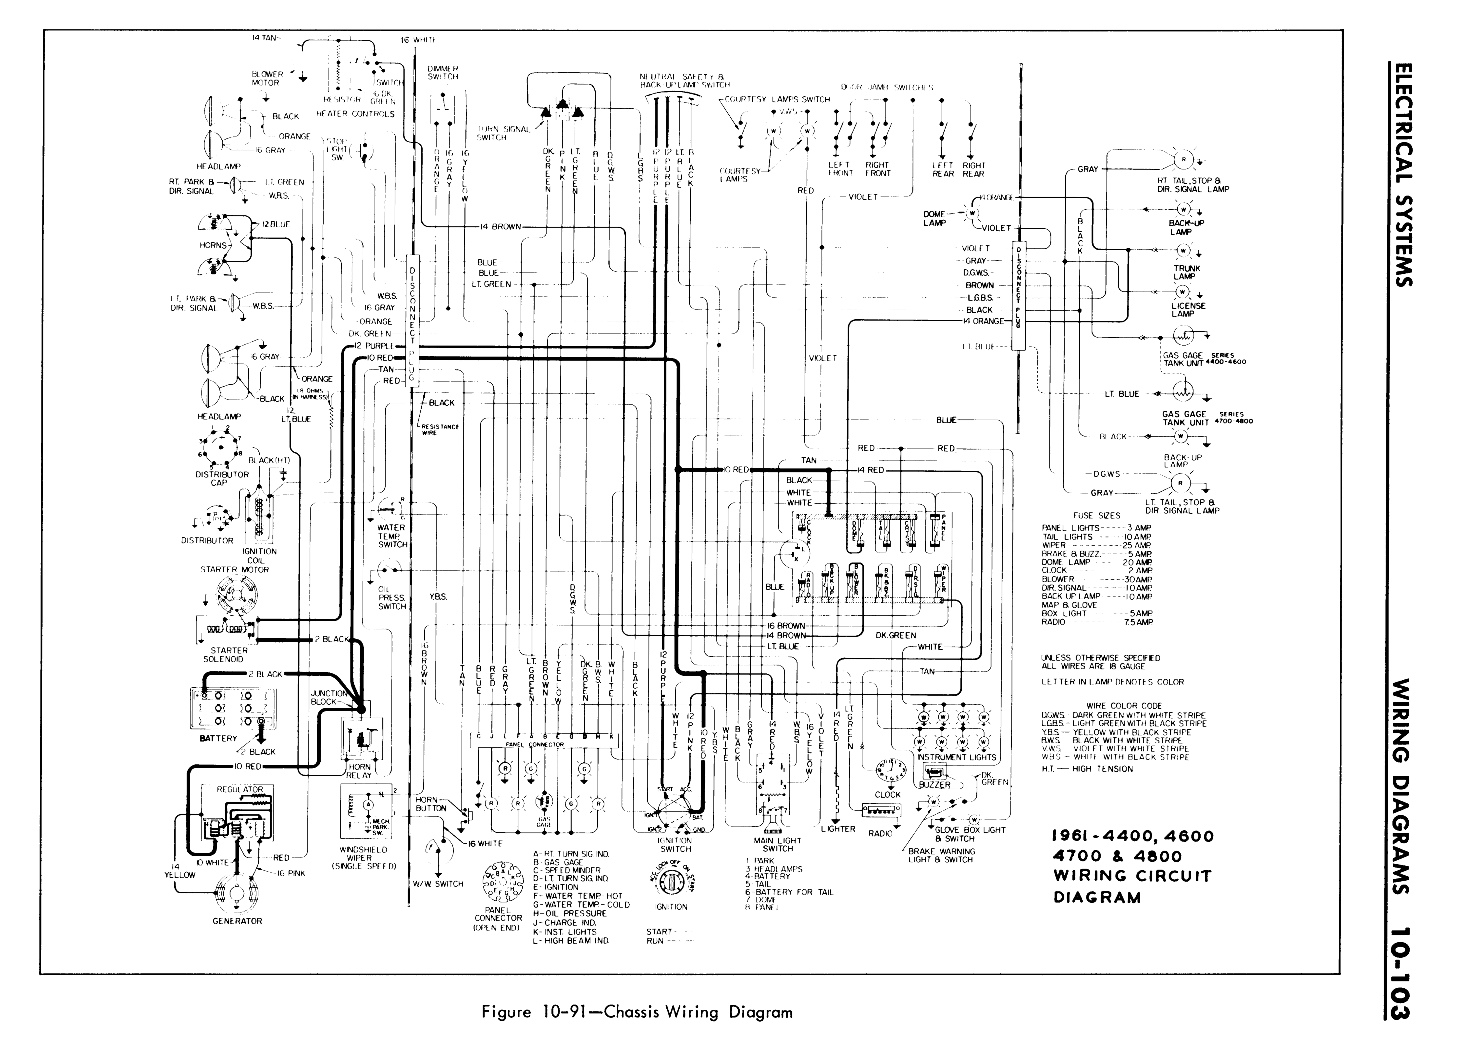 n_10 1961 Buick Shop Manual - Electrical Systems-103-103.jpg